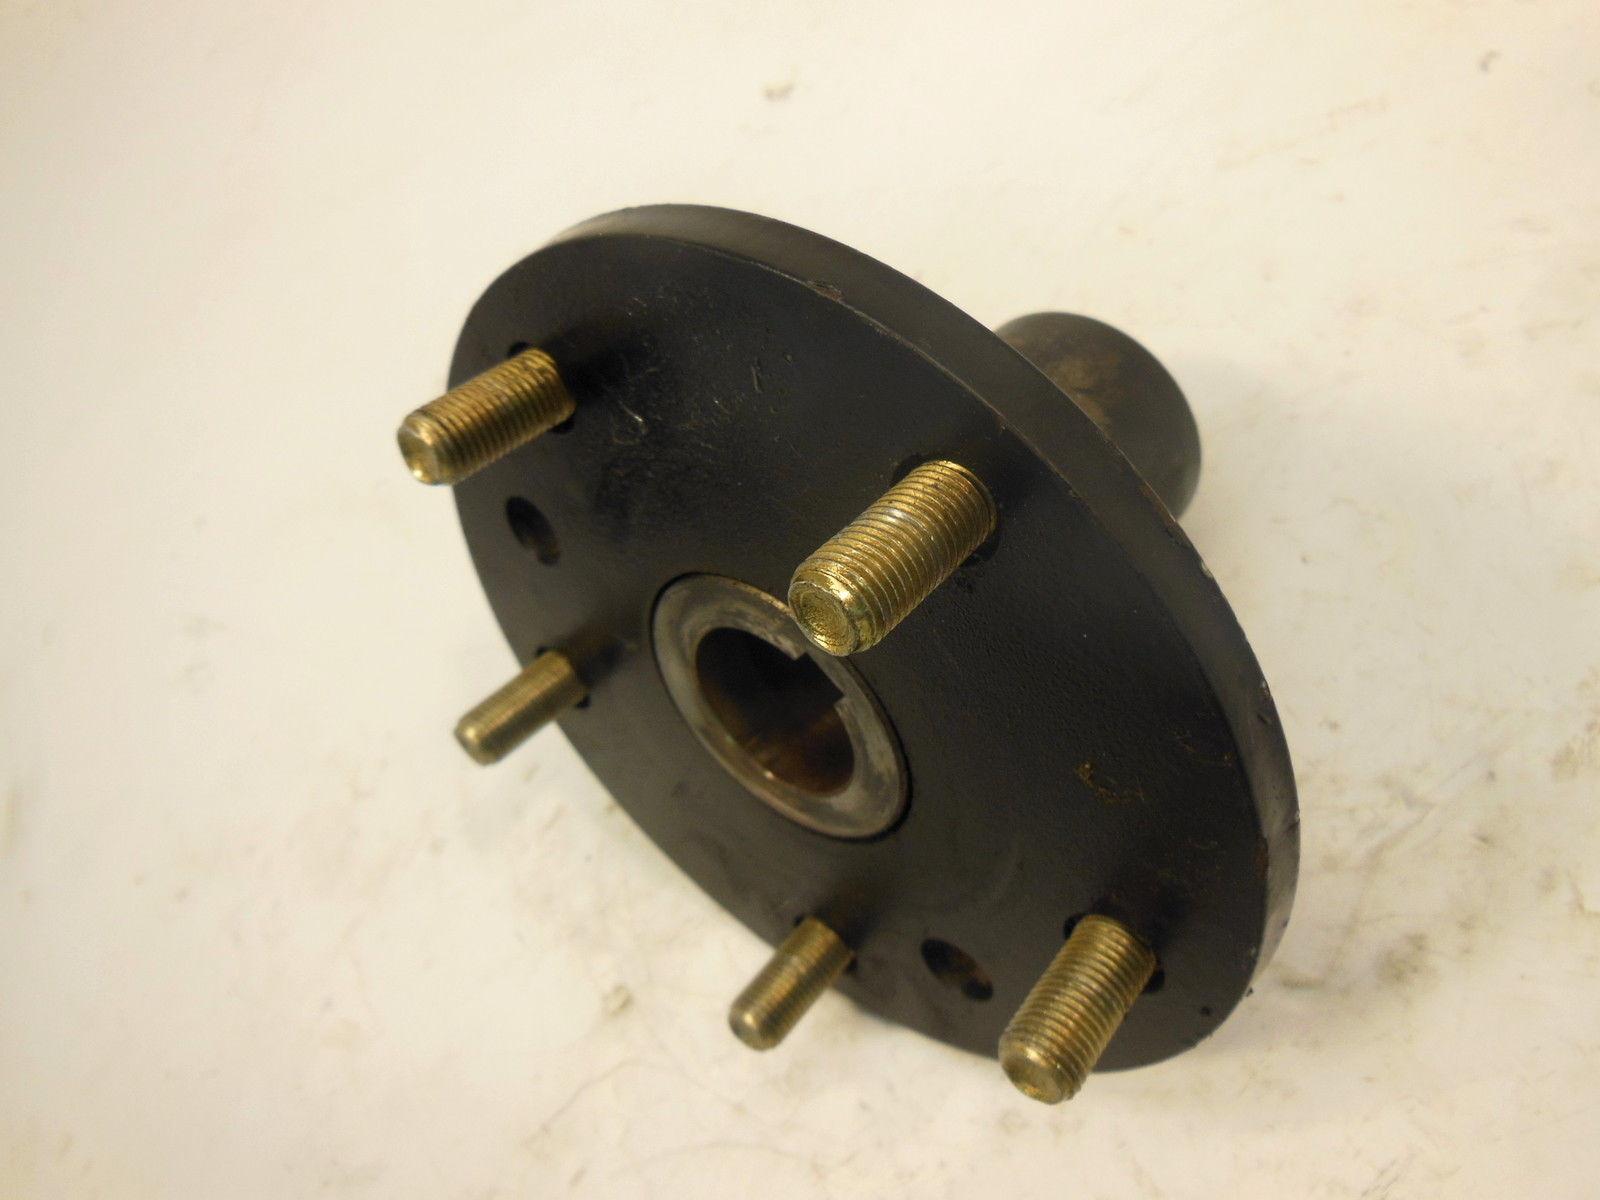 Details about Simplicity 23HP Legacy tractor 1693764 Rear wheel axle ...